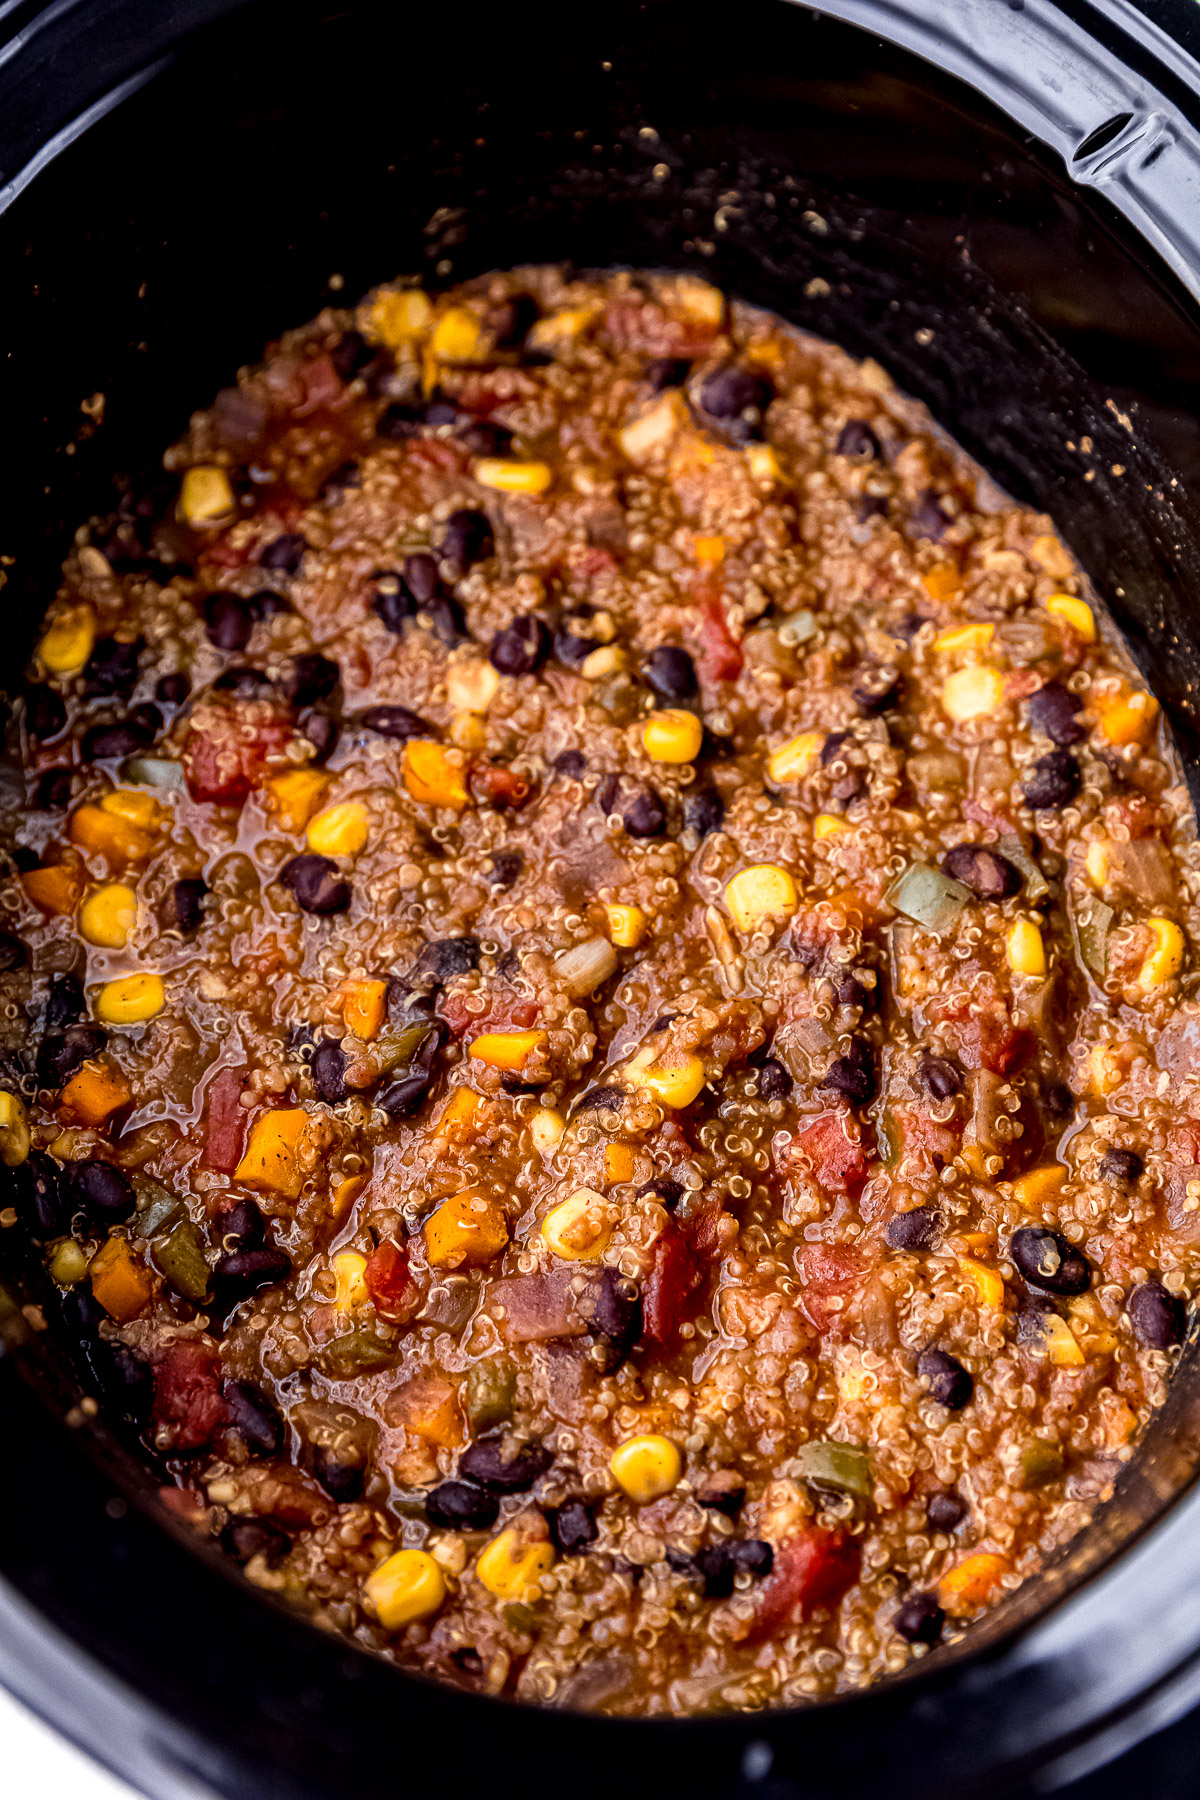 Vegan chili in a slow cooker